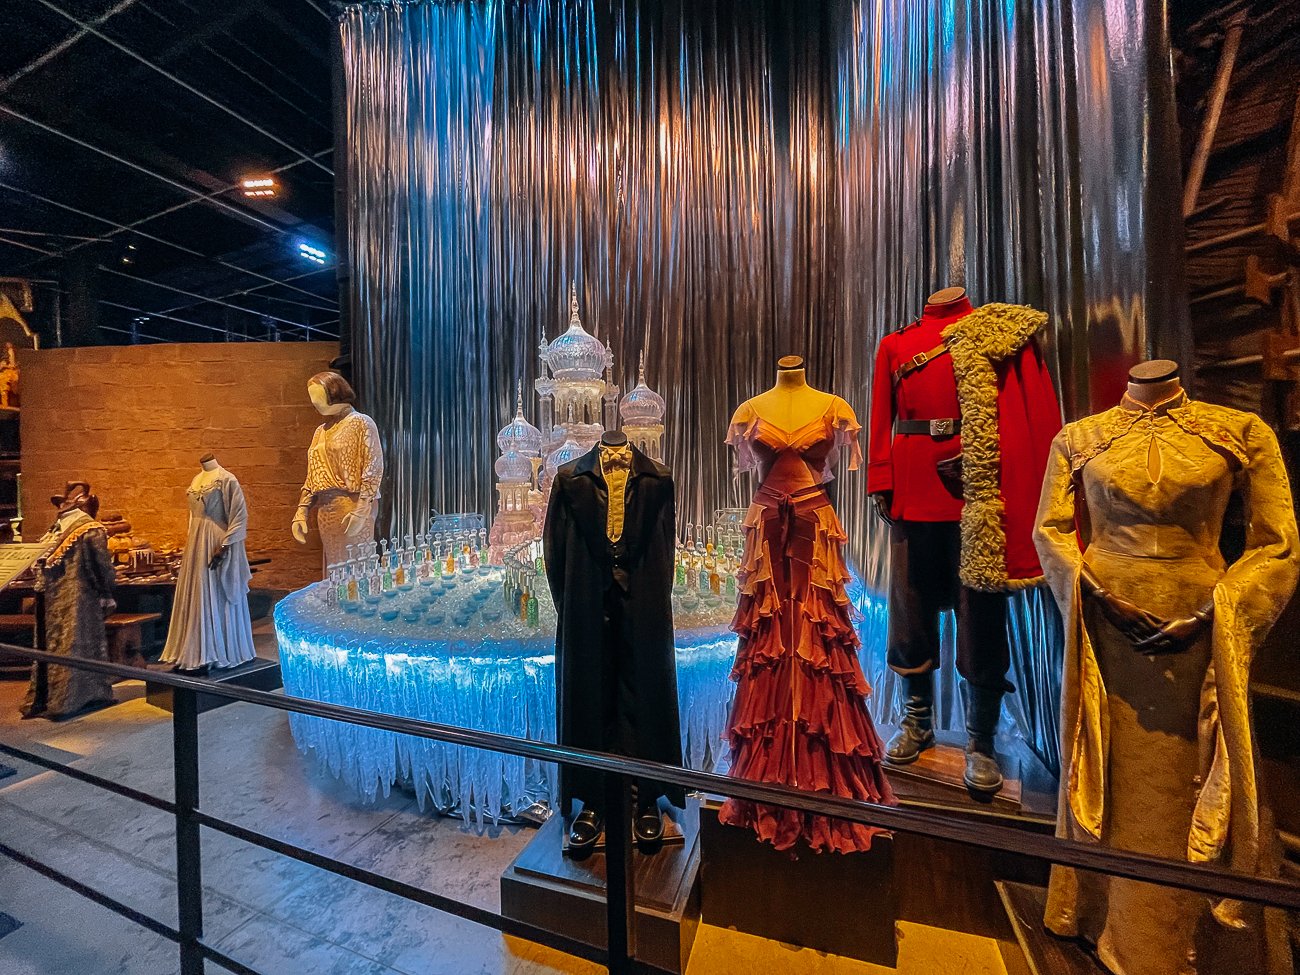 Yule Ball costumes at Harry Potter studio tour